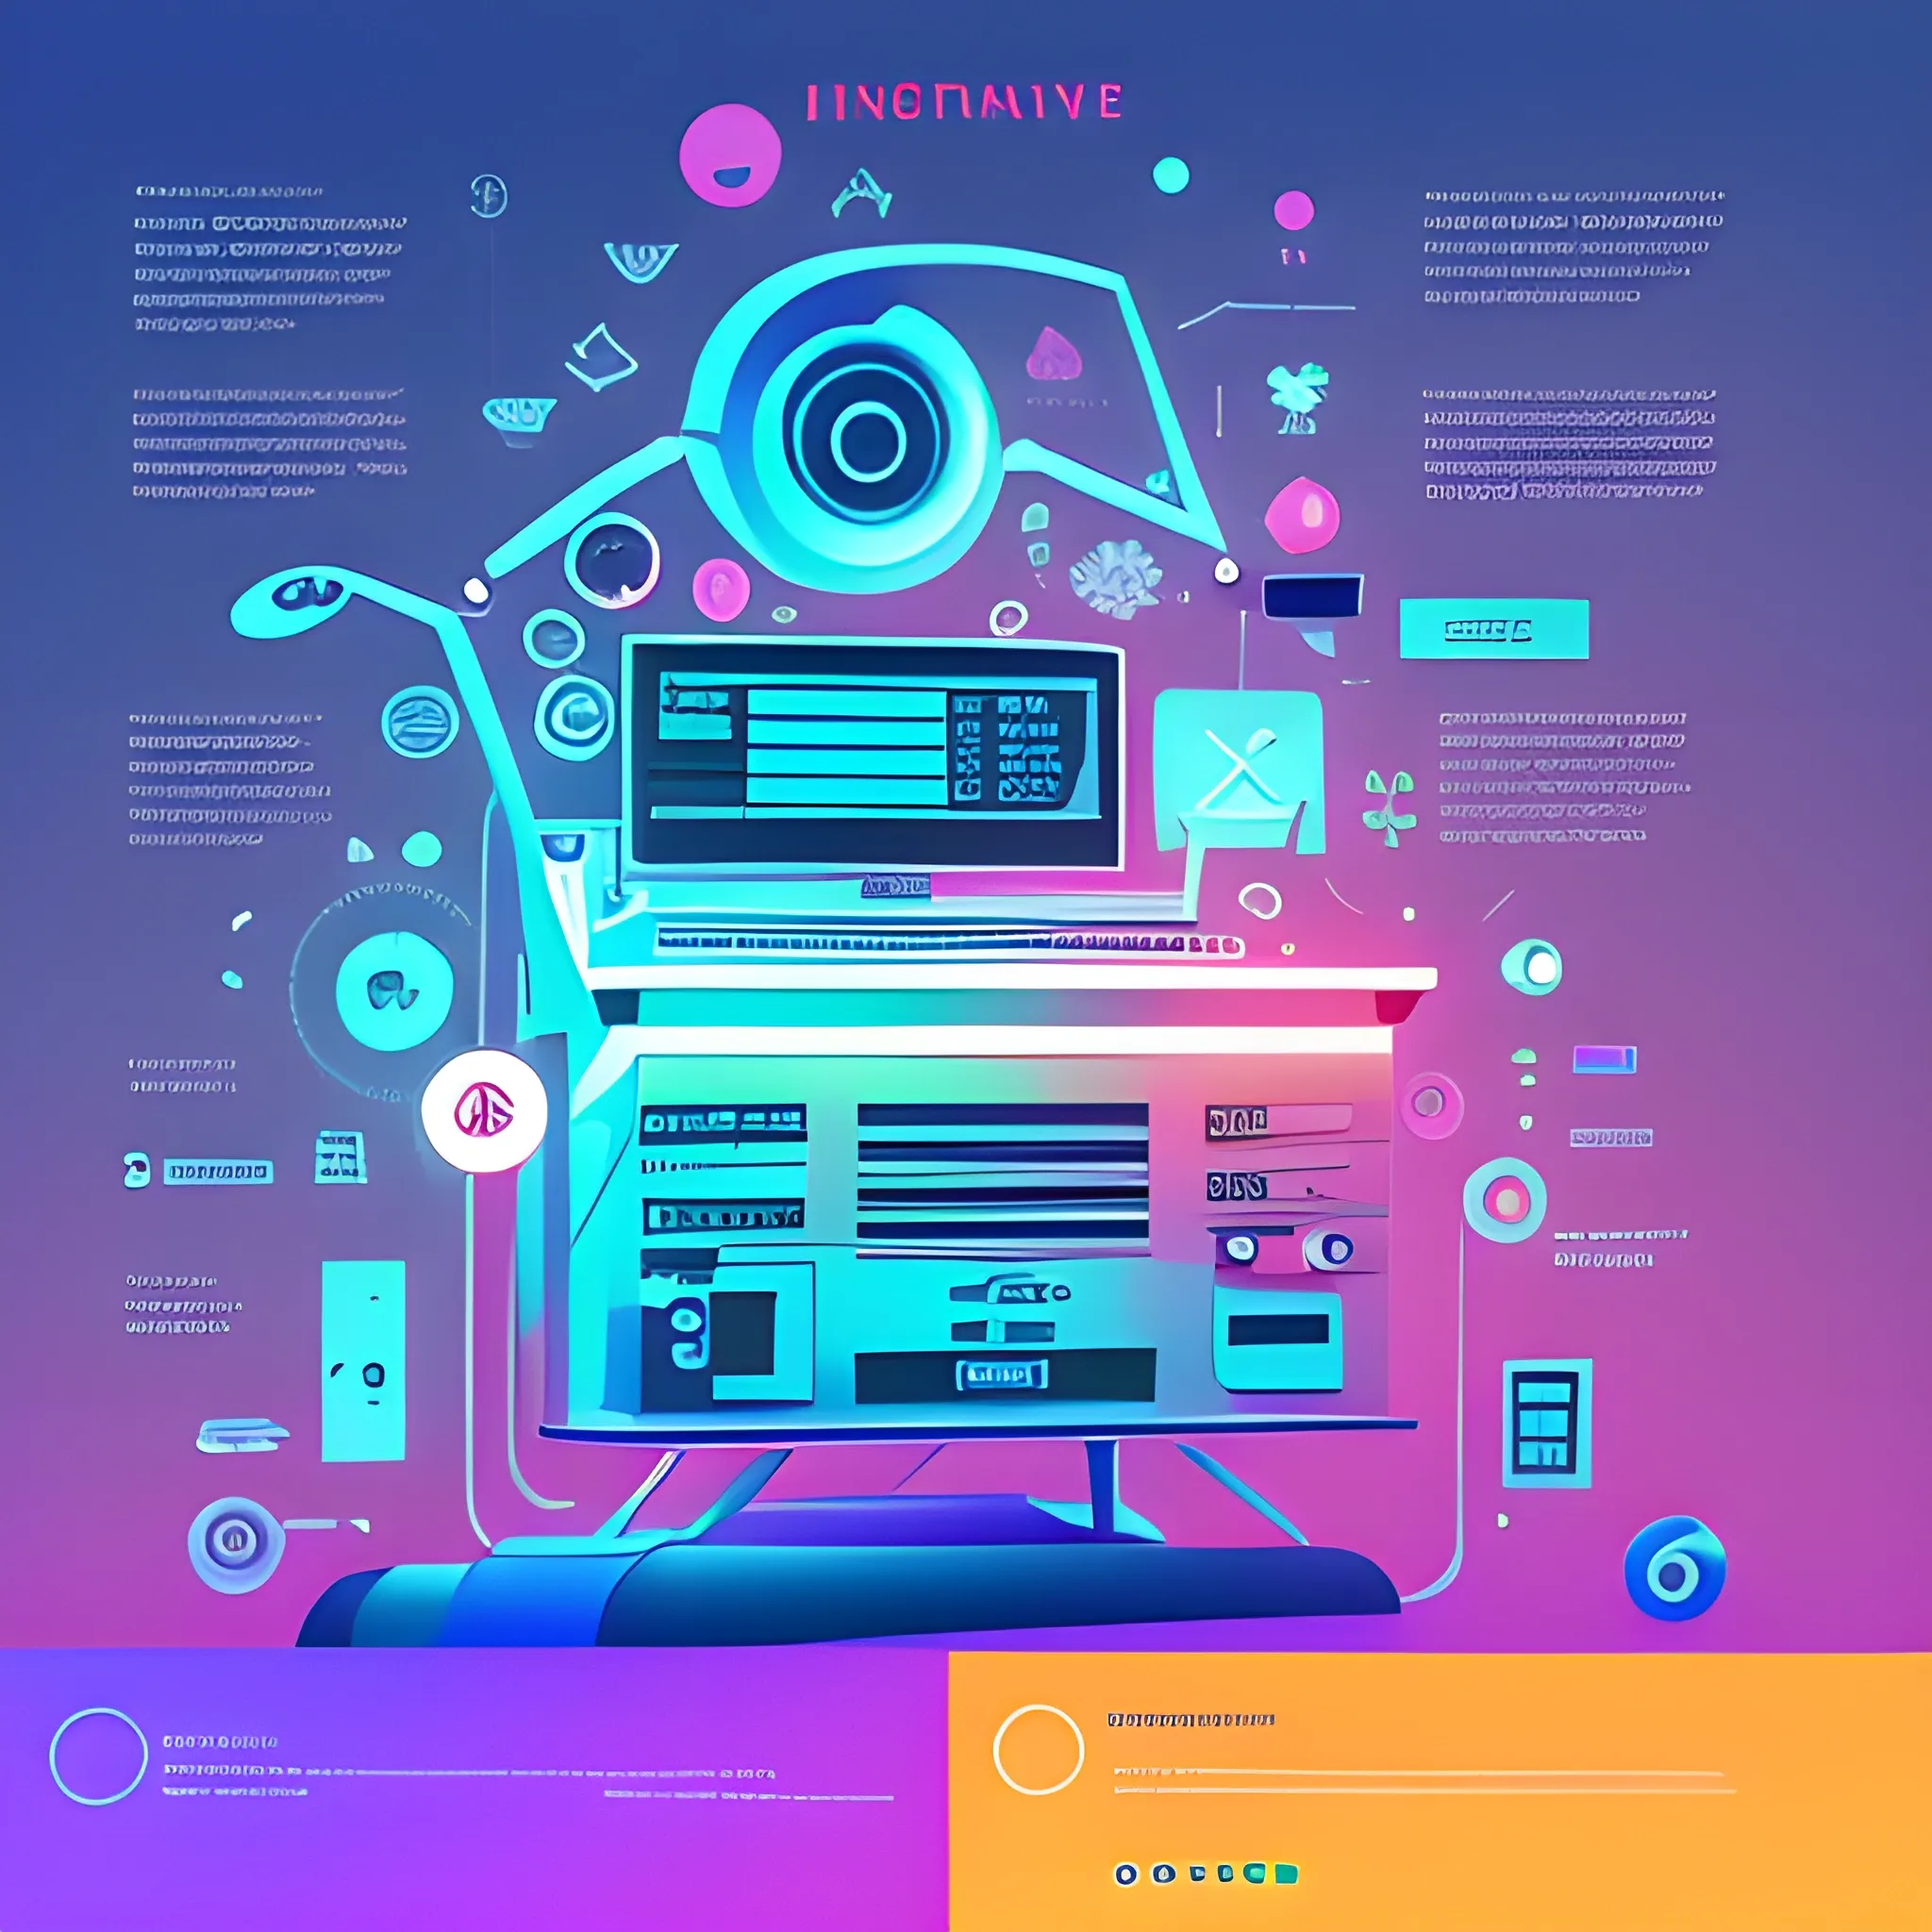 generate a corporative, future, colorful, modern image with UX RESEARCH like a concept, Trippy, related to digital products. do not use machines. Use really environment. 






